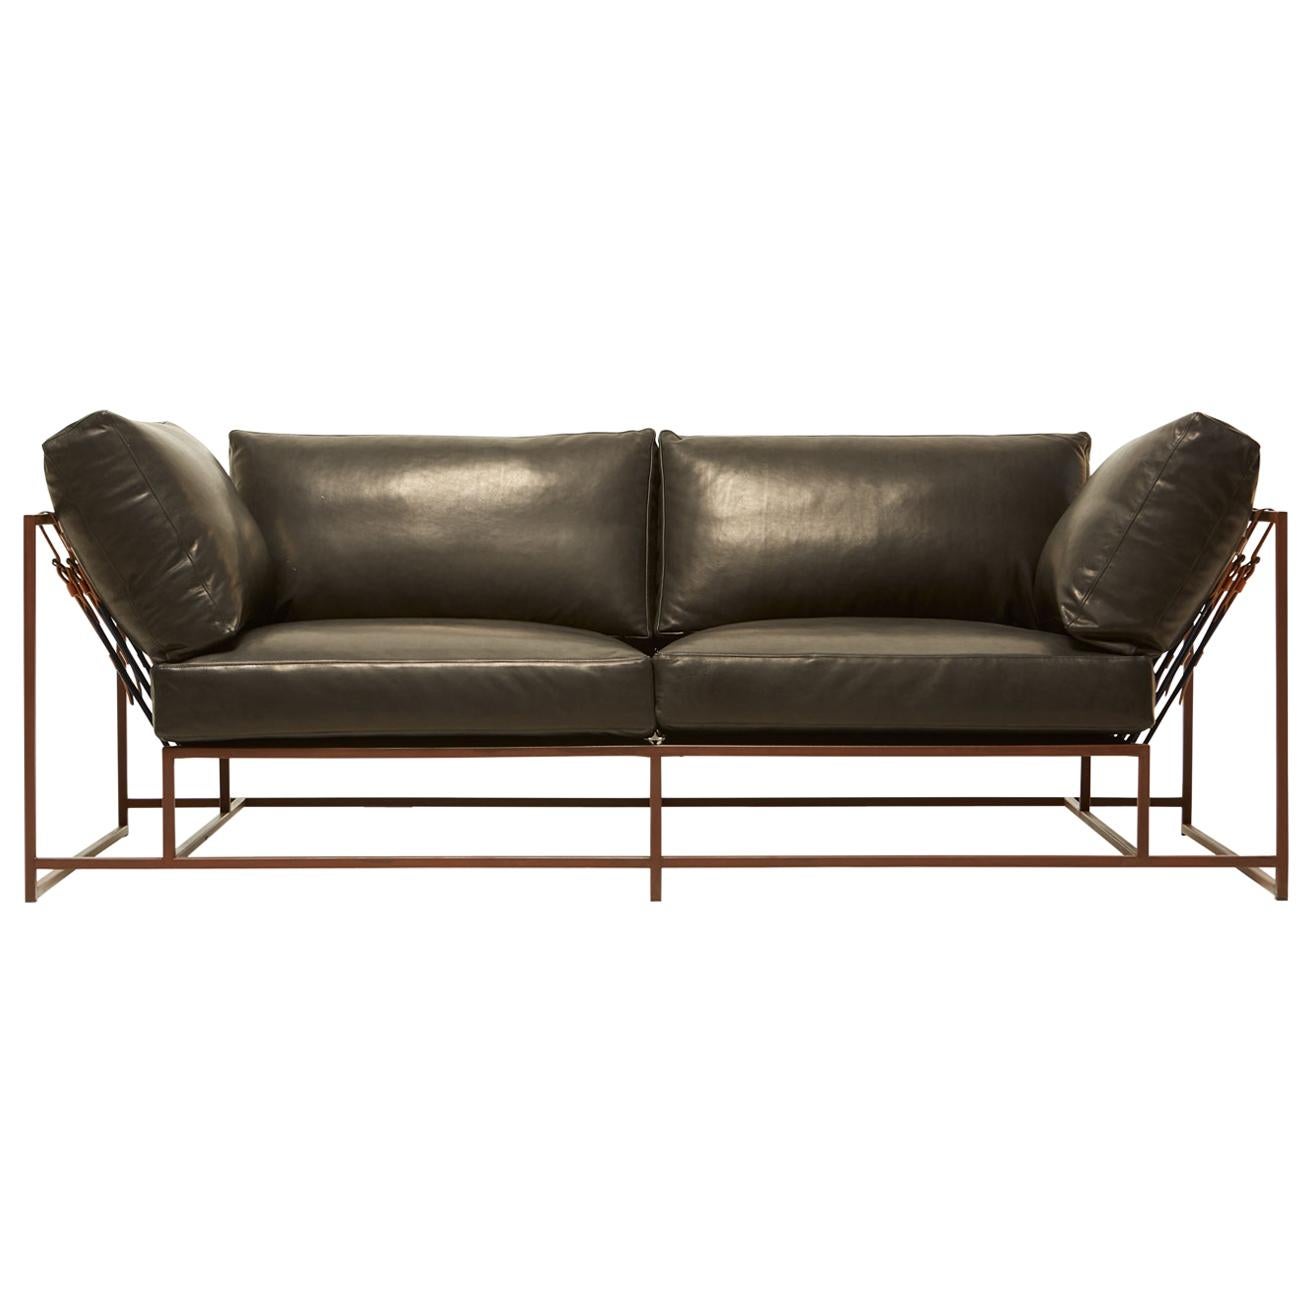 Valhalla Granite Leather and Marbled Rust Two-Seat Sofa